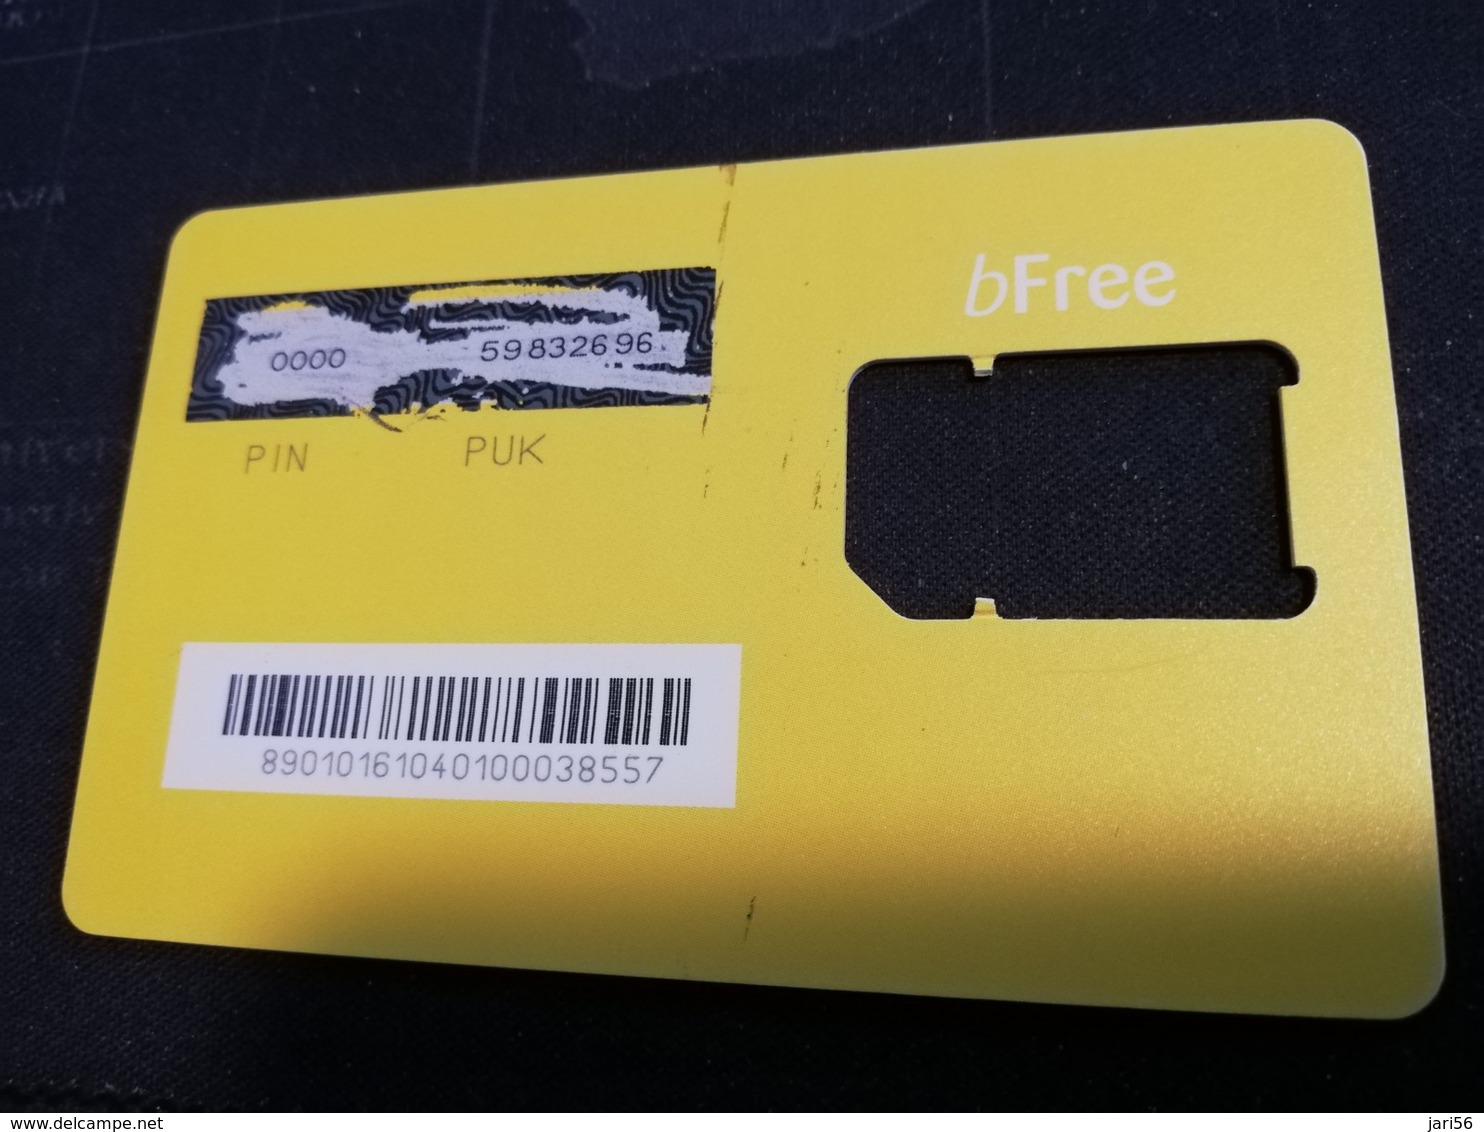 ST LUCIA    $ --     MOBILE CHIP CARRIER  B Free      Prepaid      Fine Used Card  ** 1774** - St. Lucia